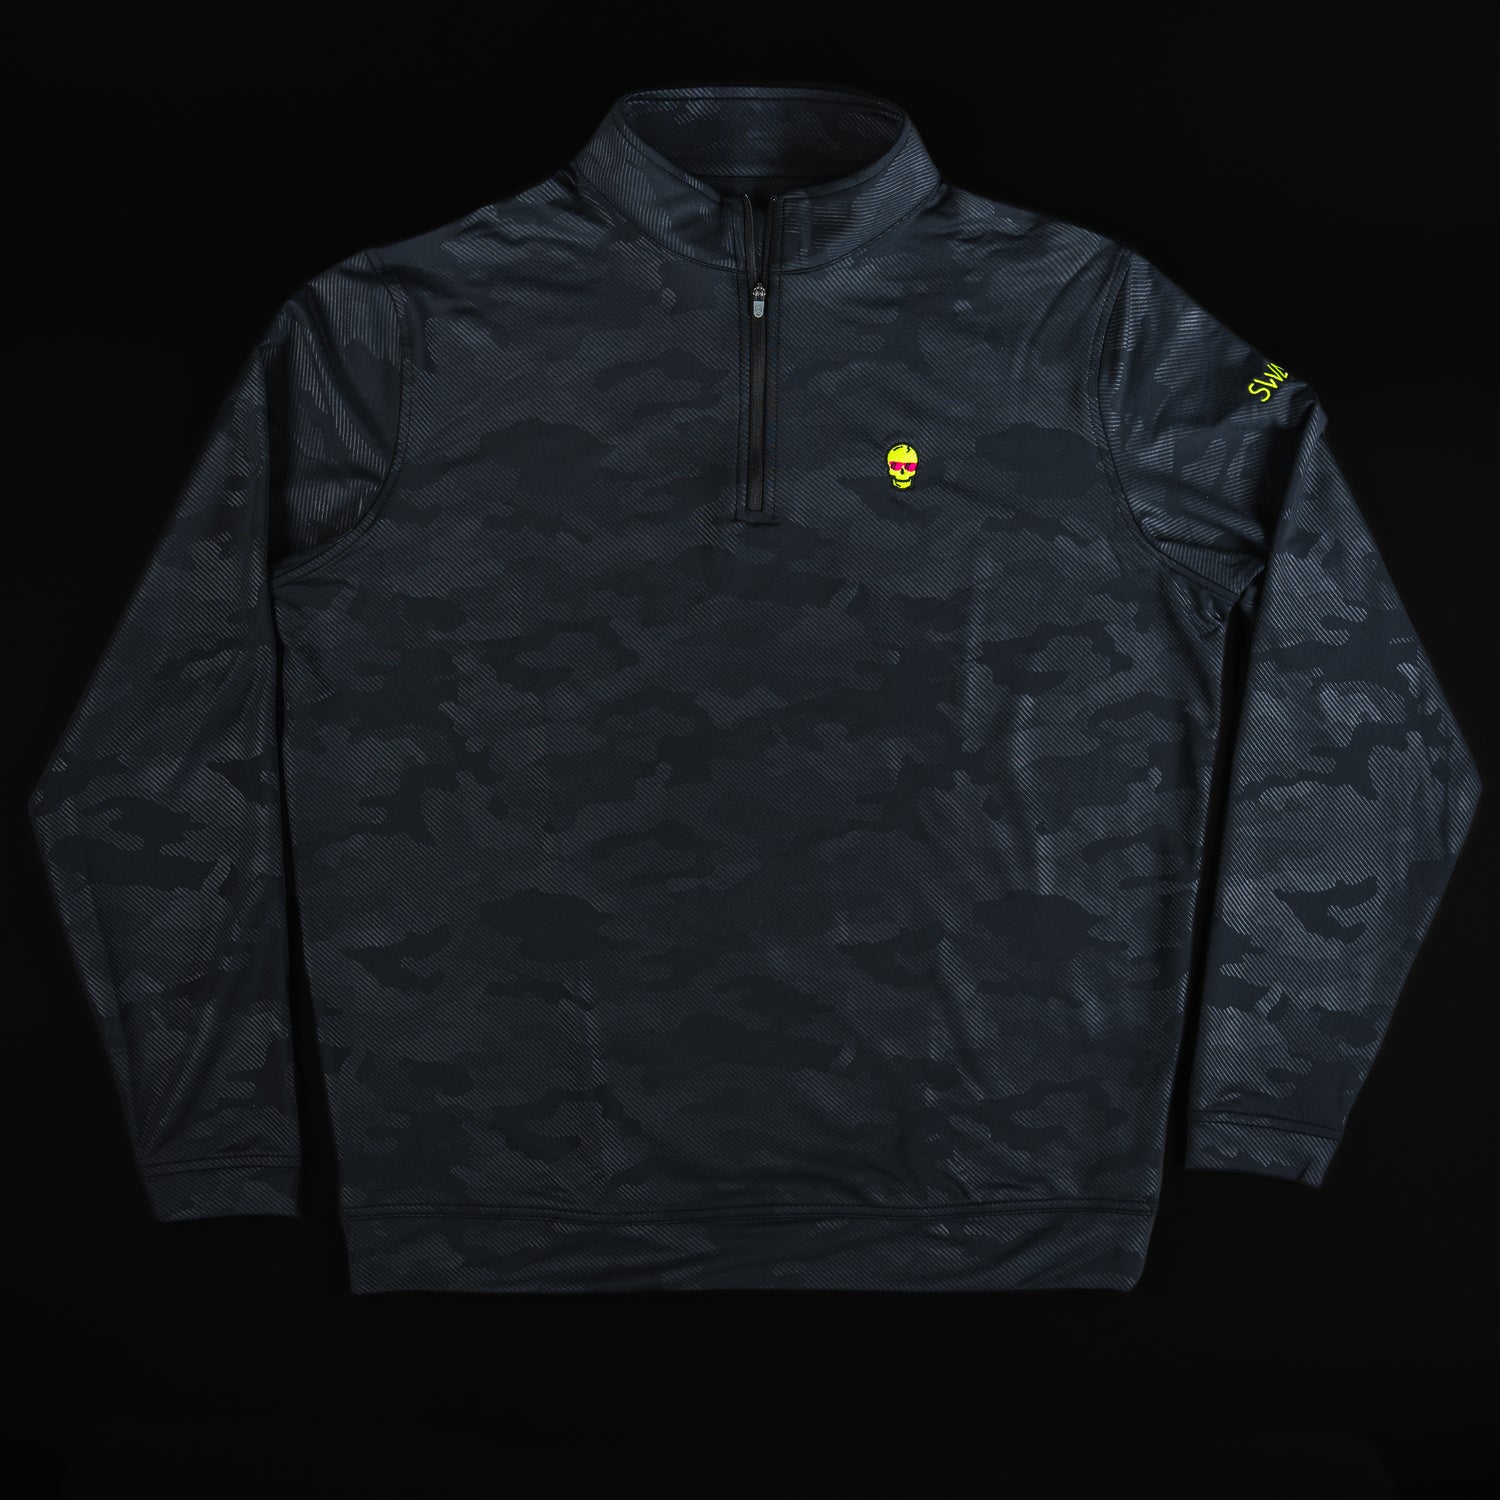 Swag x Peter Millar black camo men's long sleeve quarter zip pullover with embroidered skull and swag logo.